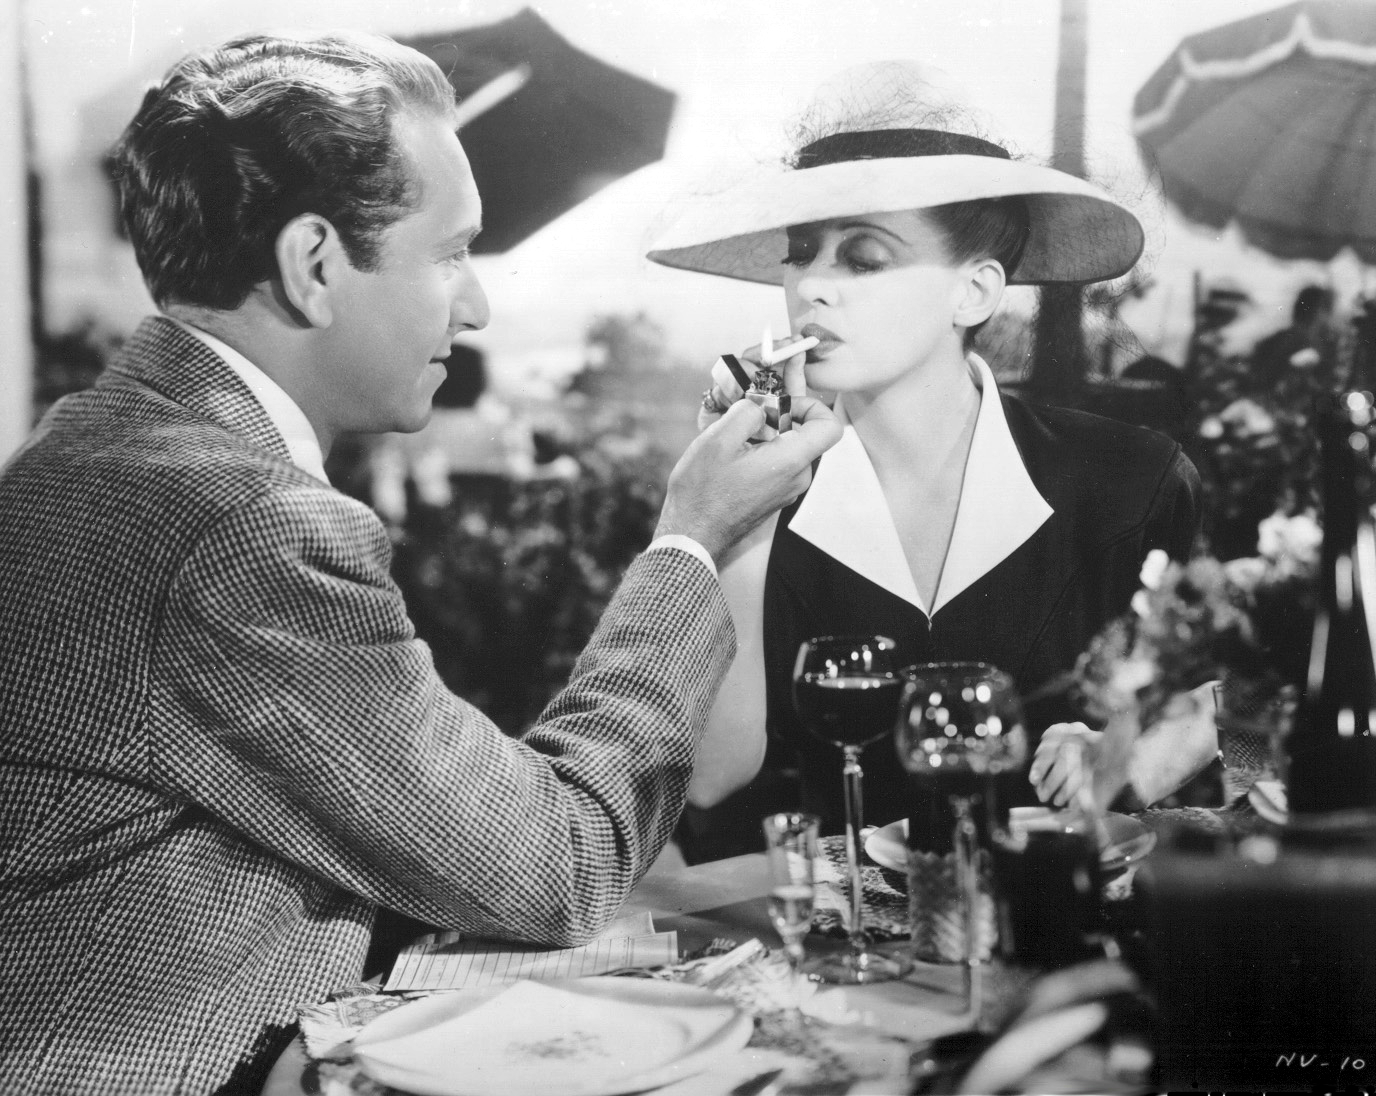 Now, Voyager - Wikipedia